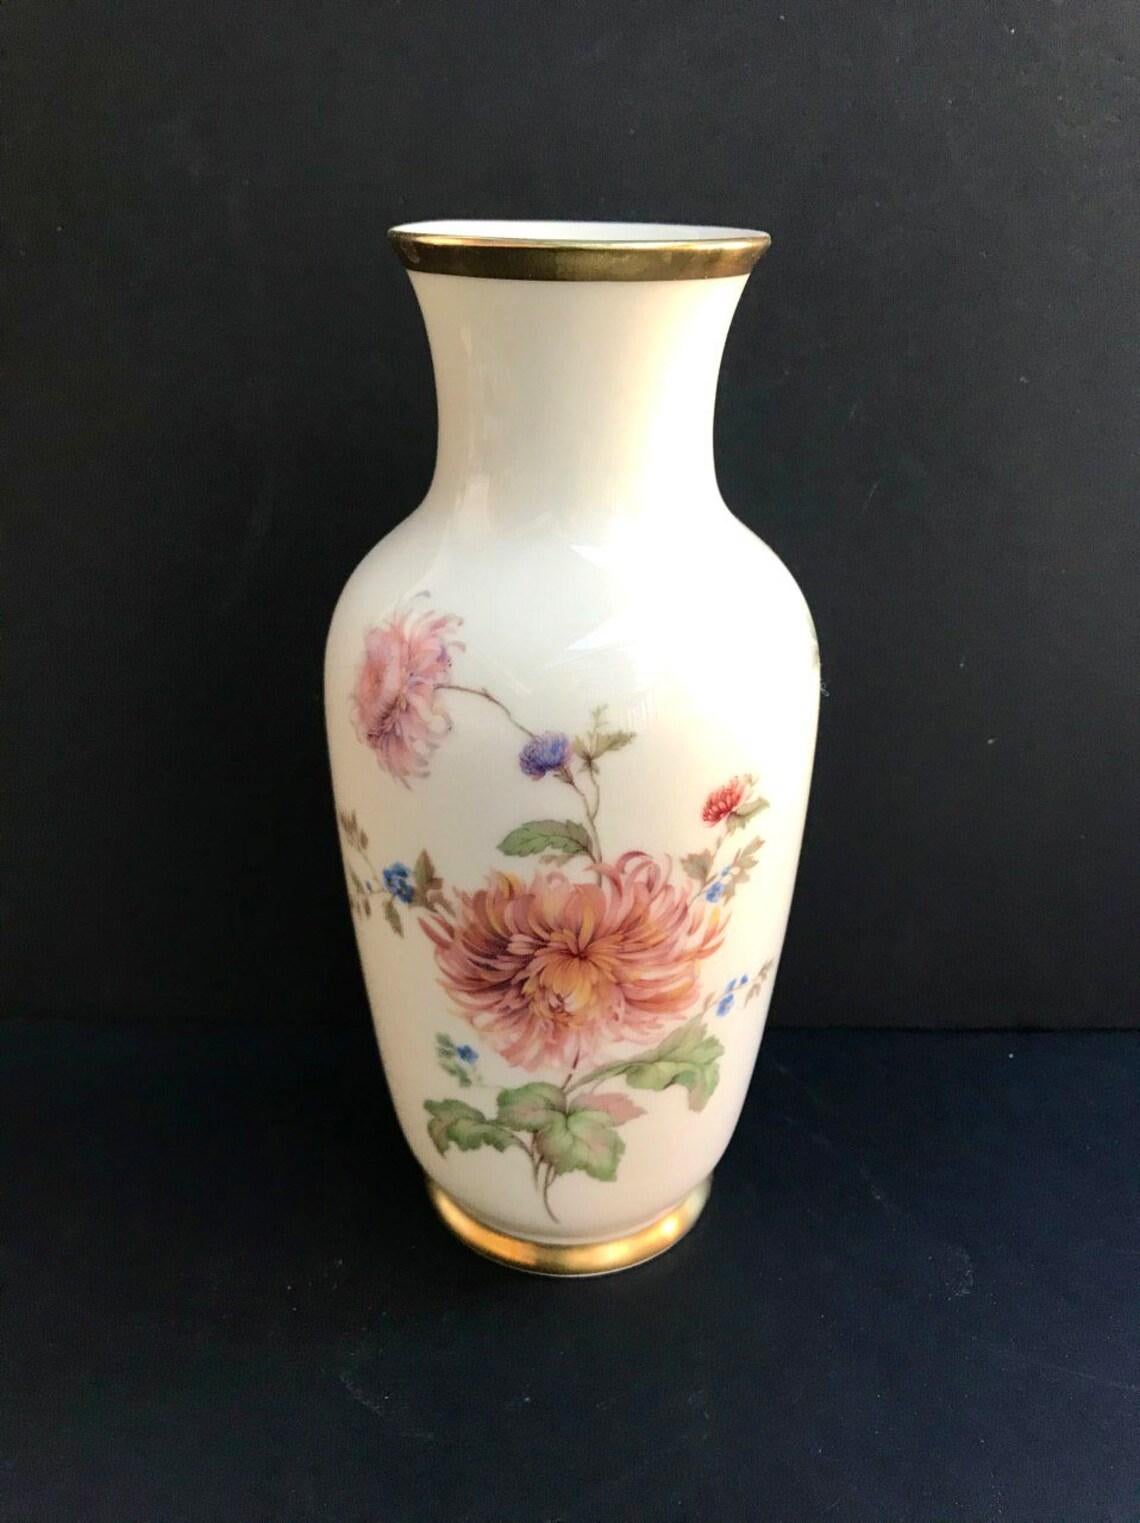 Porcelain Vase drawing from all sides.

Bavarian Vase with individual Number.

Made by Gerold Porzellan Bavaria.

In excellent condition, no chips, cracks or crazing.

Stamp, test number (numbered).

Size:

Height - 9.4 inc 24